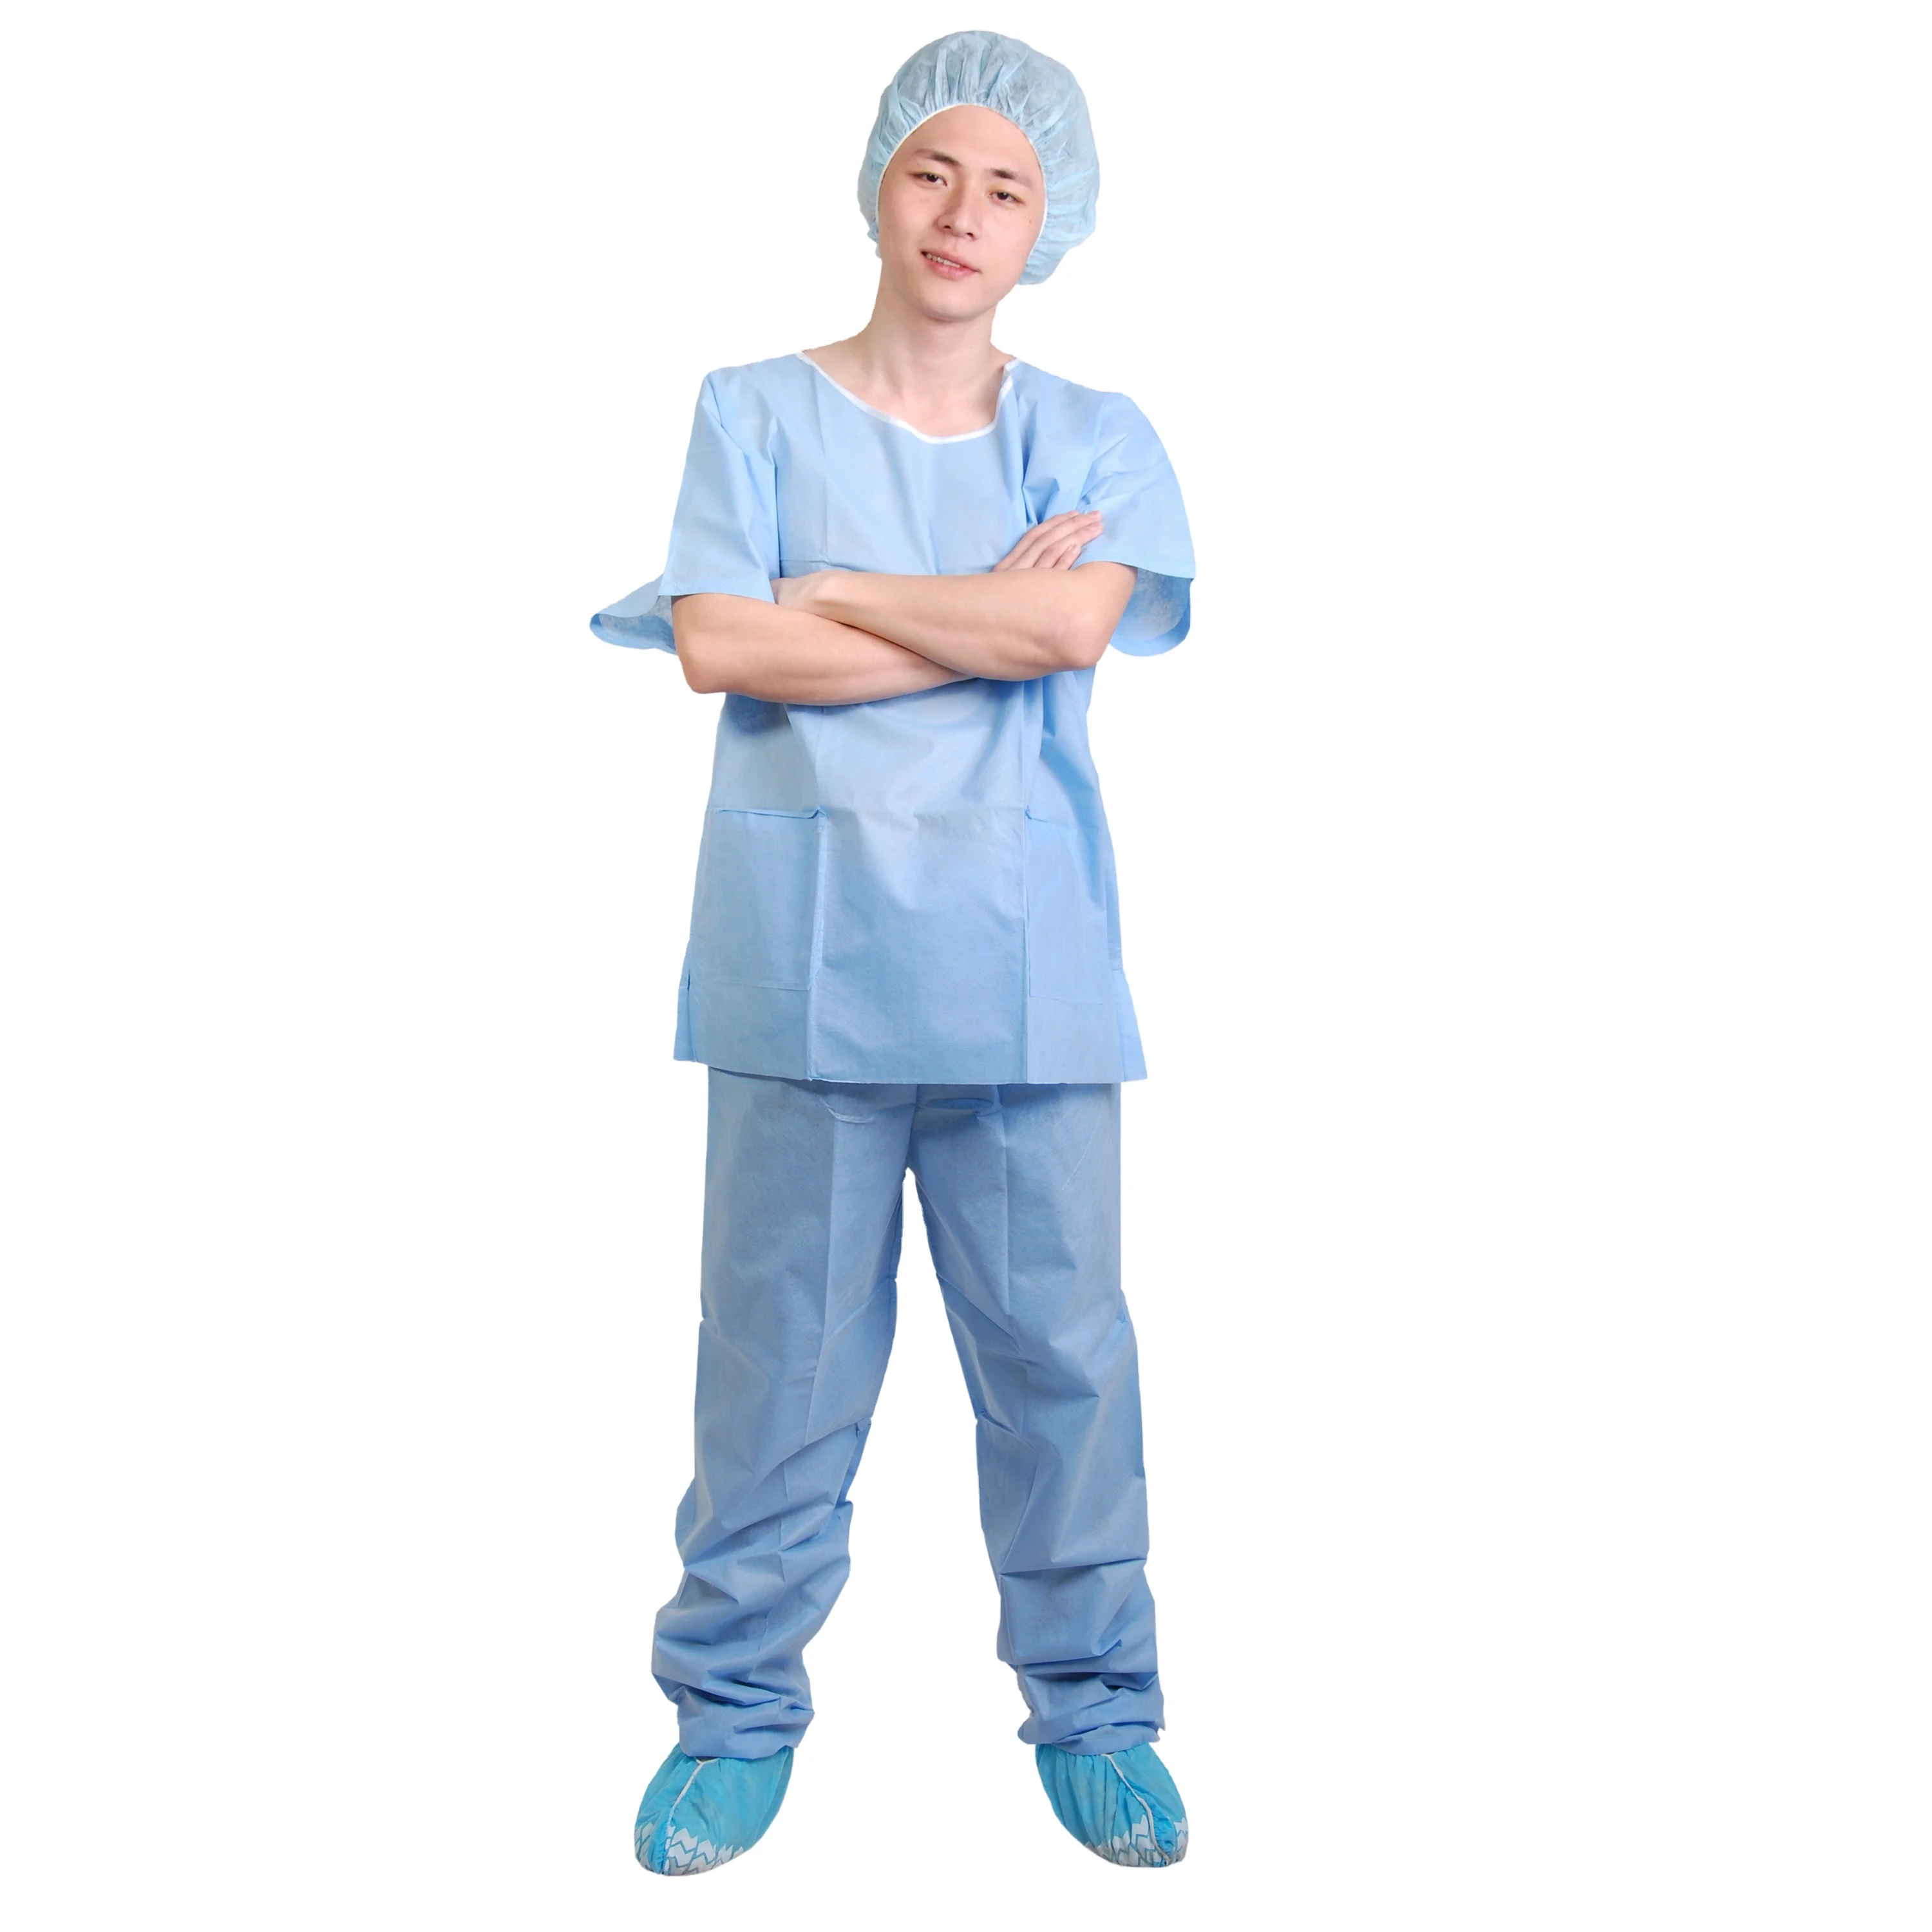 Topmed hot sale medical uniform Disposable SMS Patient gown nonwoven Scrub Suits